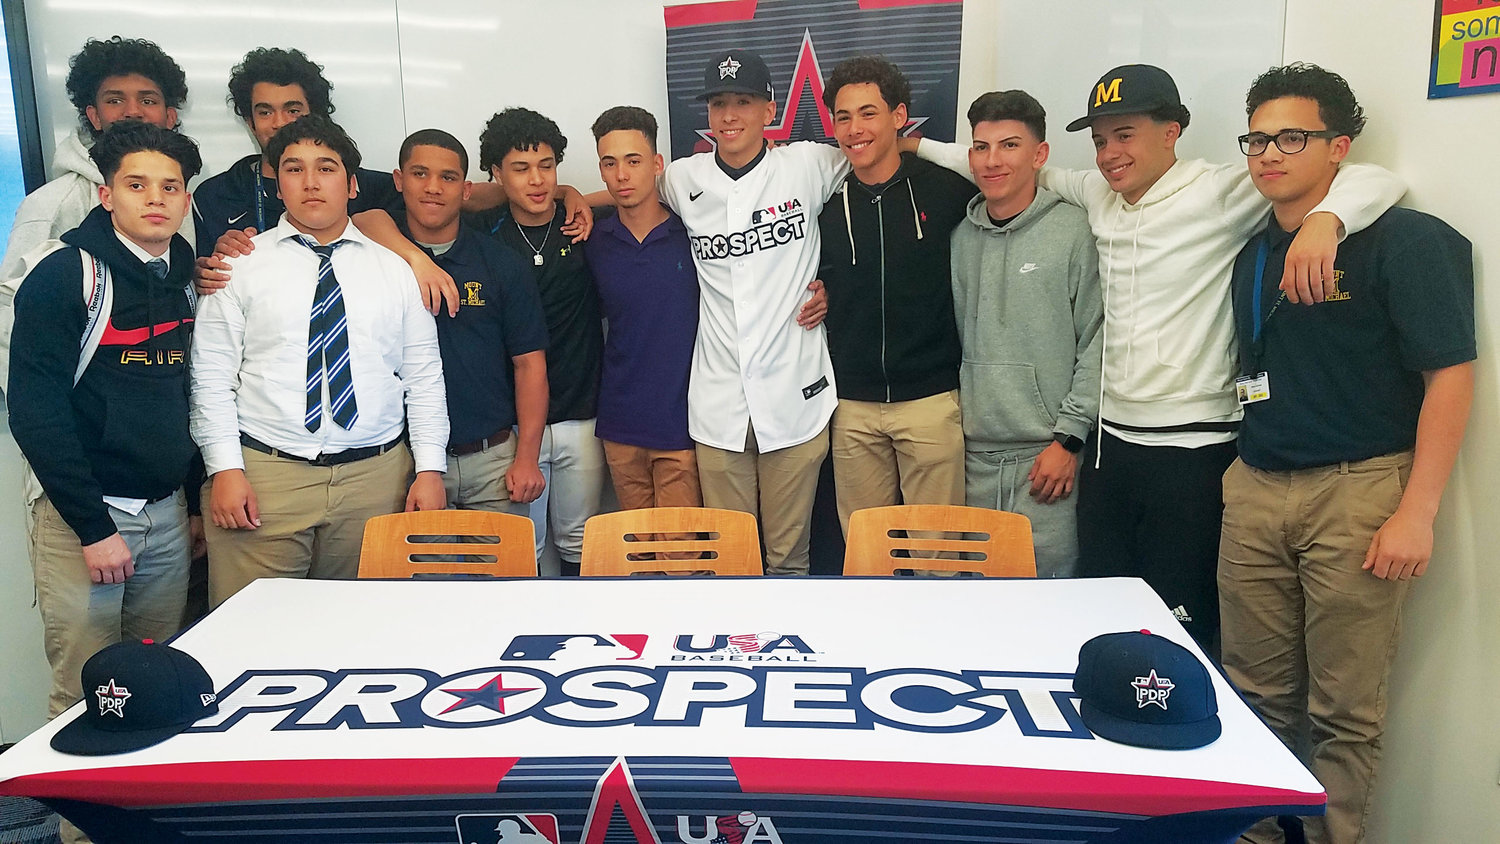 OFF TO CAMP—Alex Santos, center, joins his Mount St. Michael Academy teammates after being presented his jersey and cap for the inaugural Prospect Development Pipeline League in a ceremony May 16 at the Bronx school.